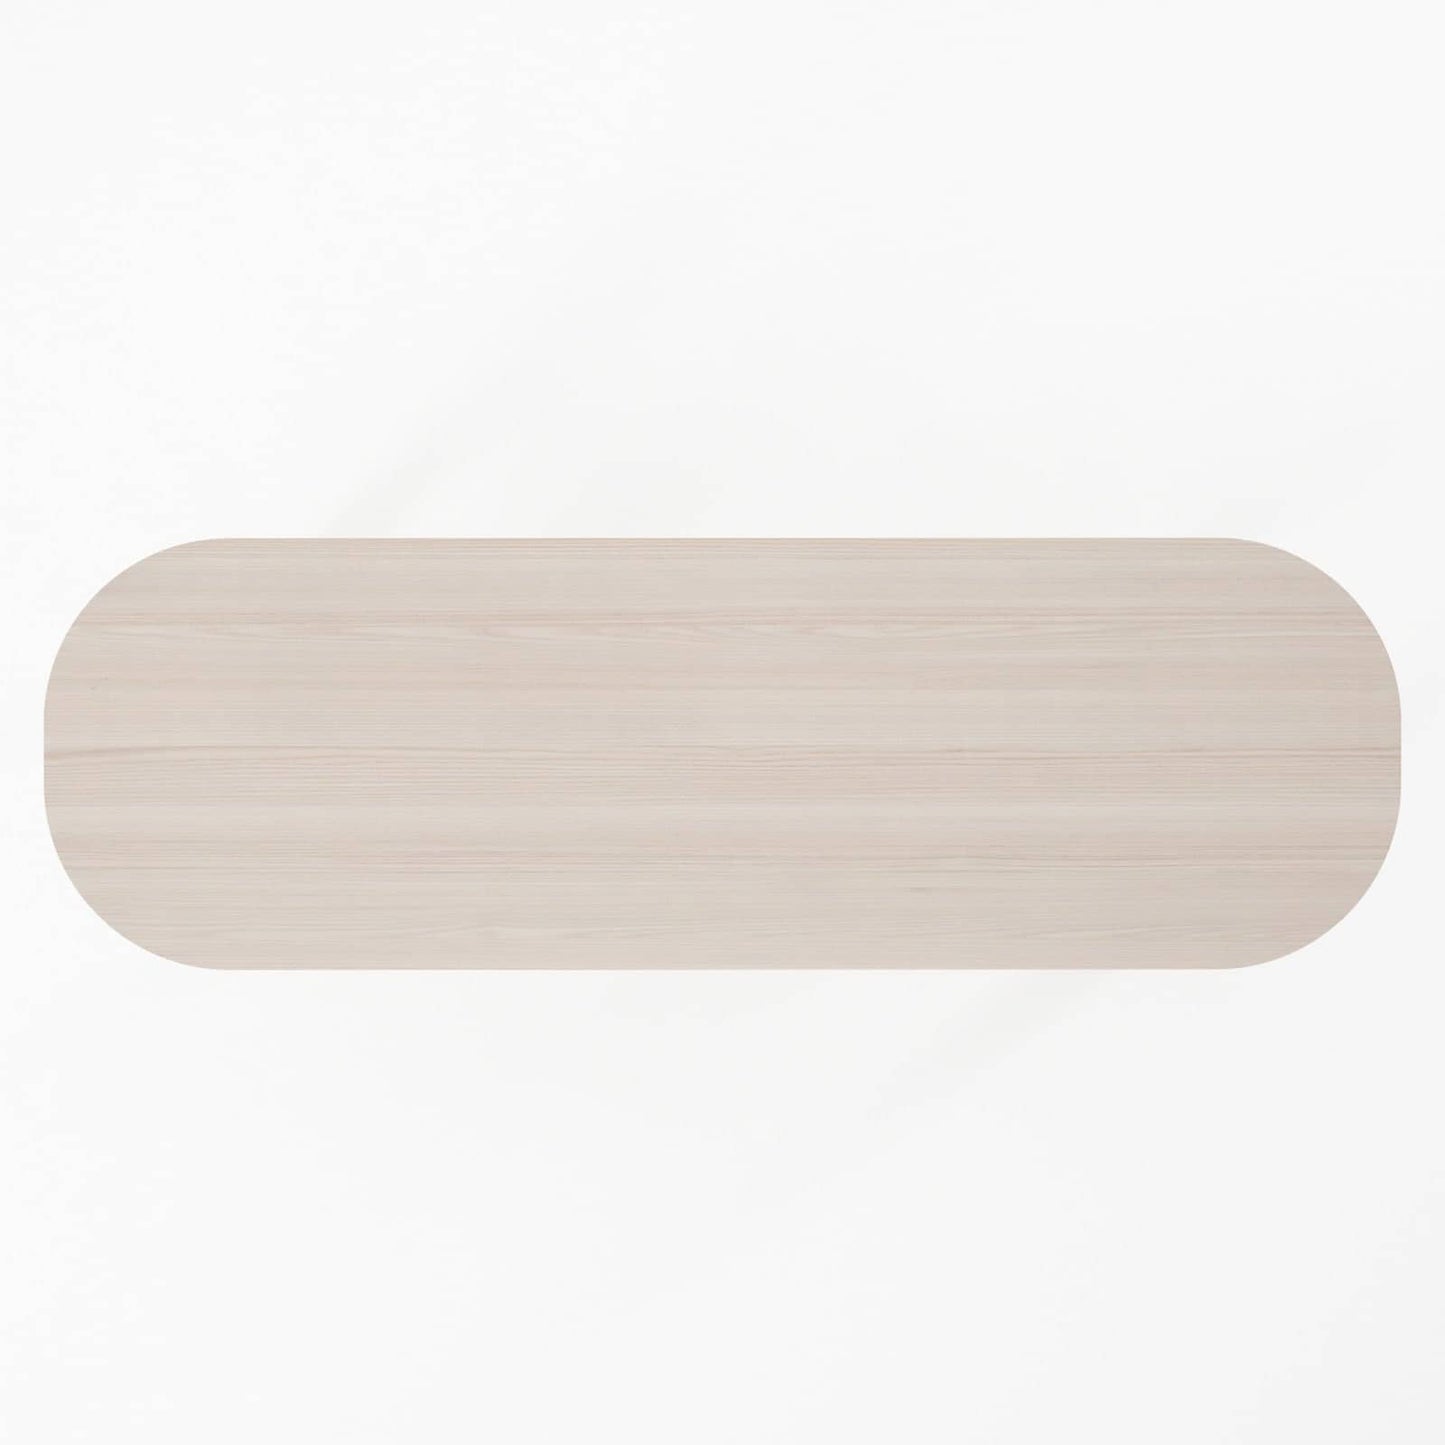 Curbus Oval Bench - White Ash